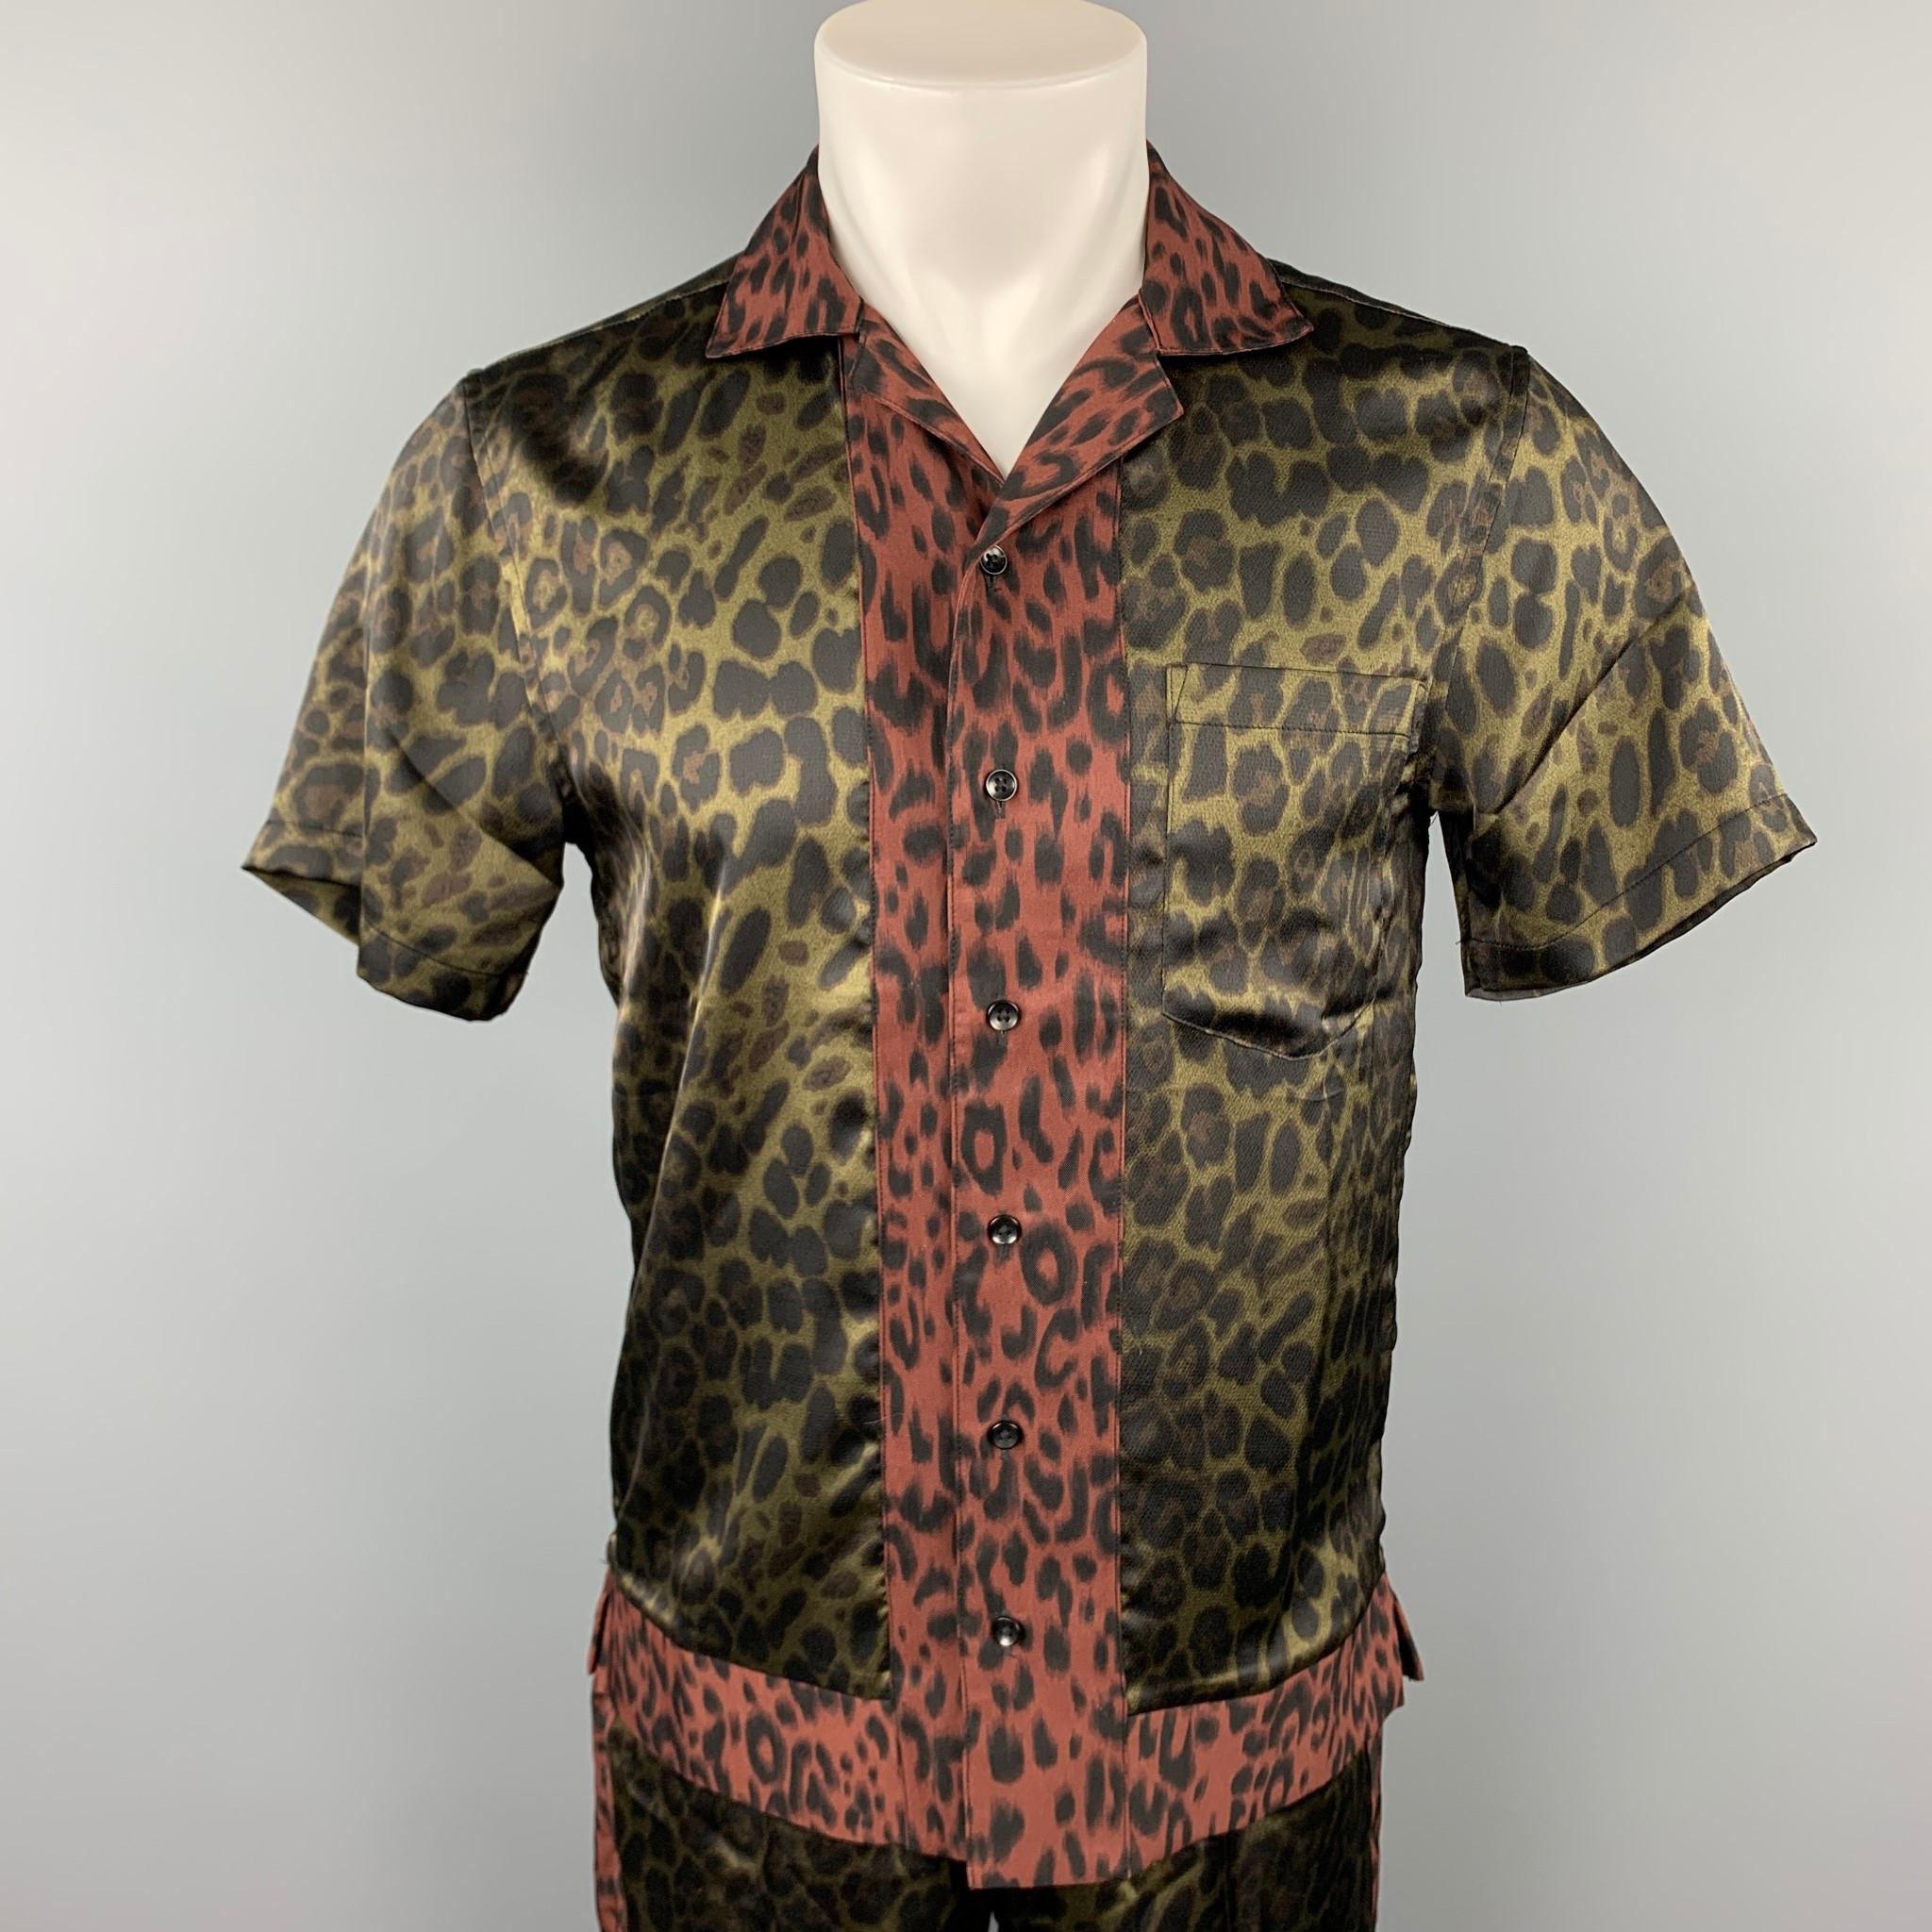 SHADES OF GREY by MICAH COHEN two piece set comes in a olive animal print polyester featuring a camp style, front pocket, buttoned closure, and matching shorts. 

Very Good Pre-Owned Condition.
Marked: S

Measurements:

-Shirt
Shoulder: 17.5